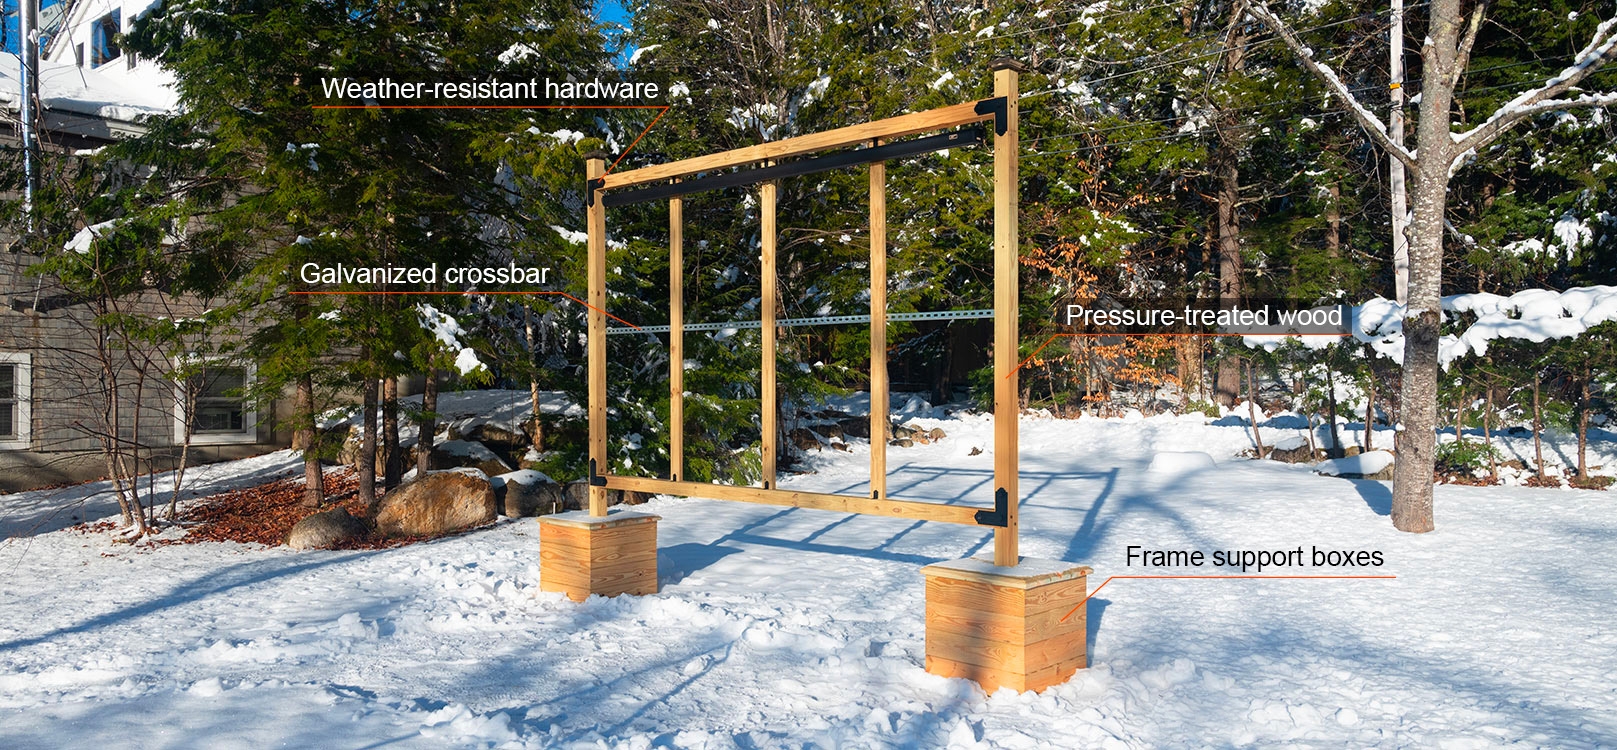 Timberline Movable Screen Frame and Wired Outdoor Movie Theater setup in the winter.